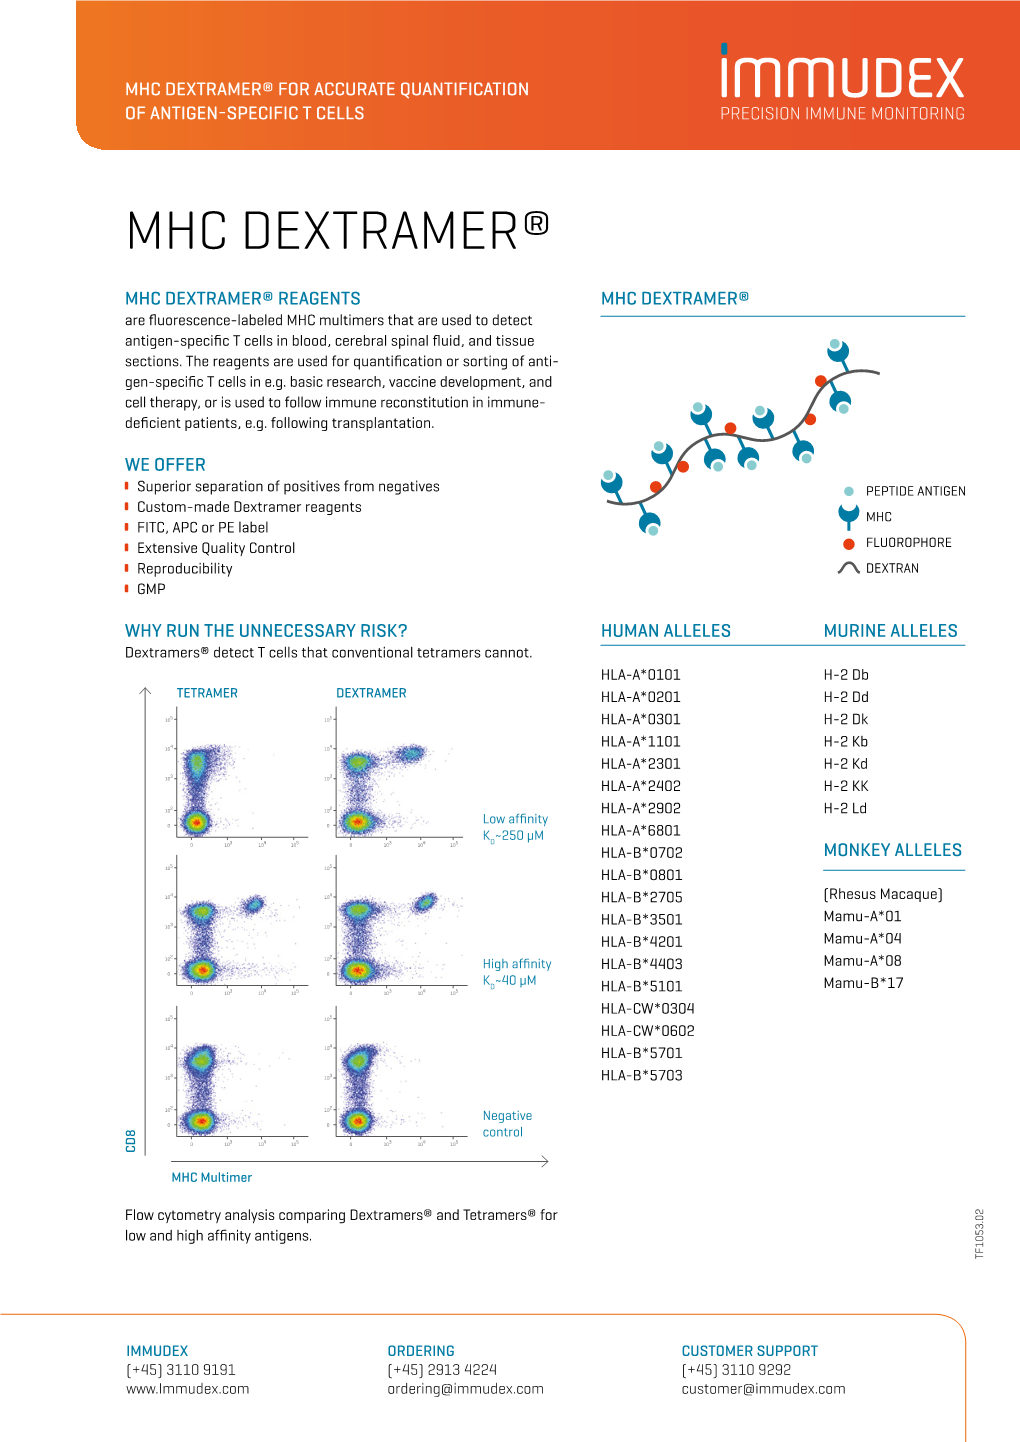 Mhc Dextramer® for Accurate Quantification of Antigen-Specific T Cells